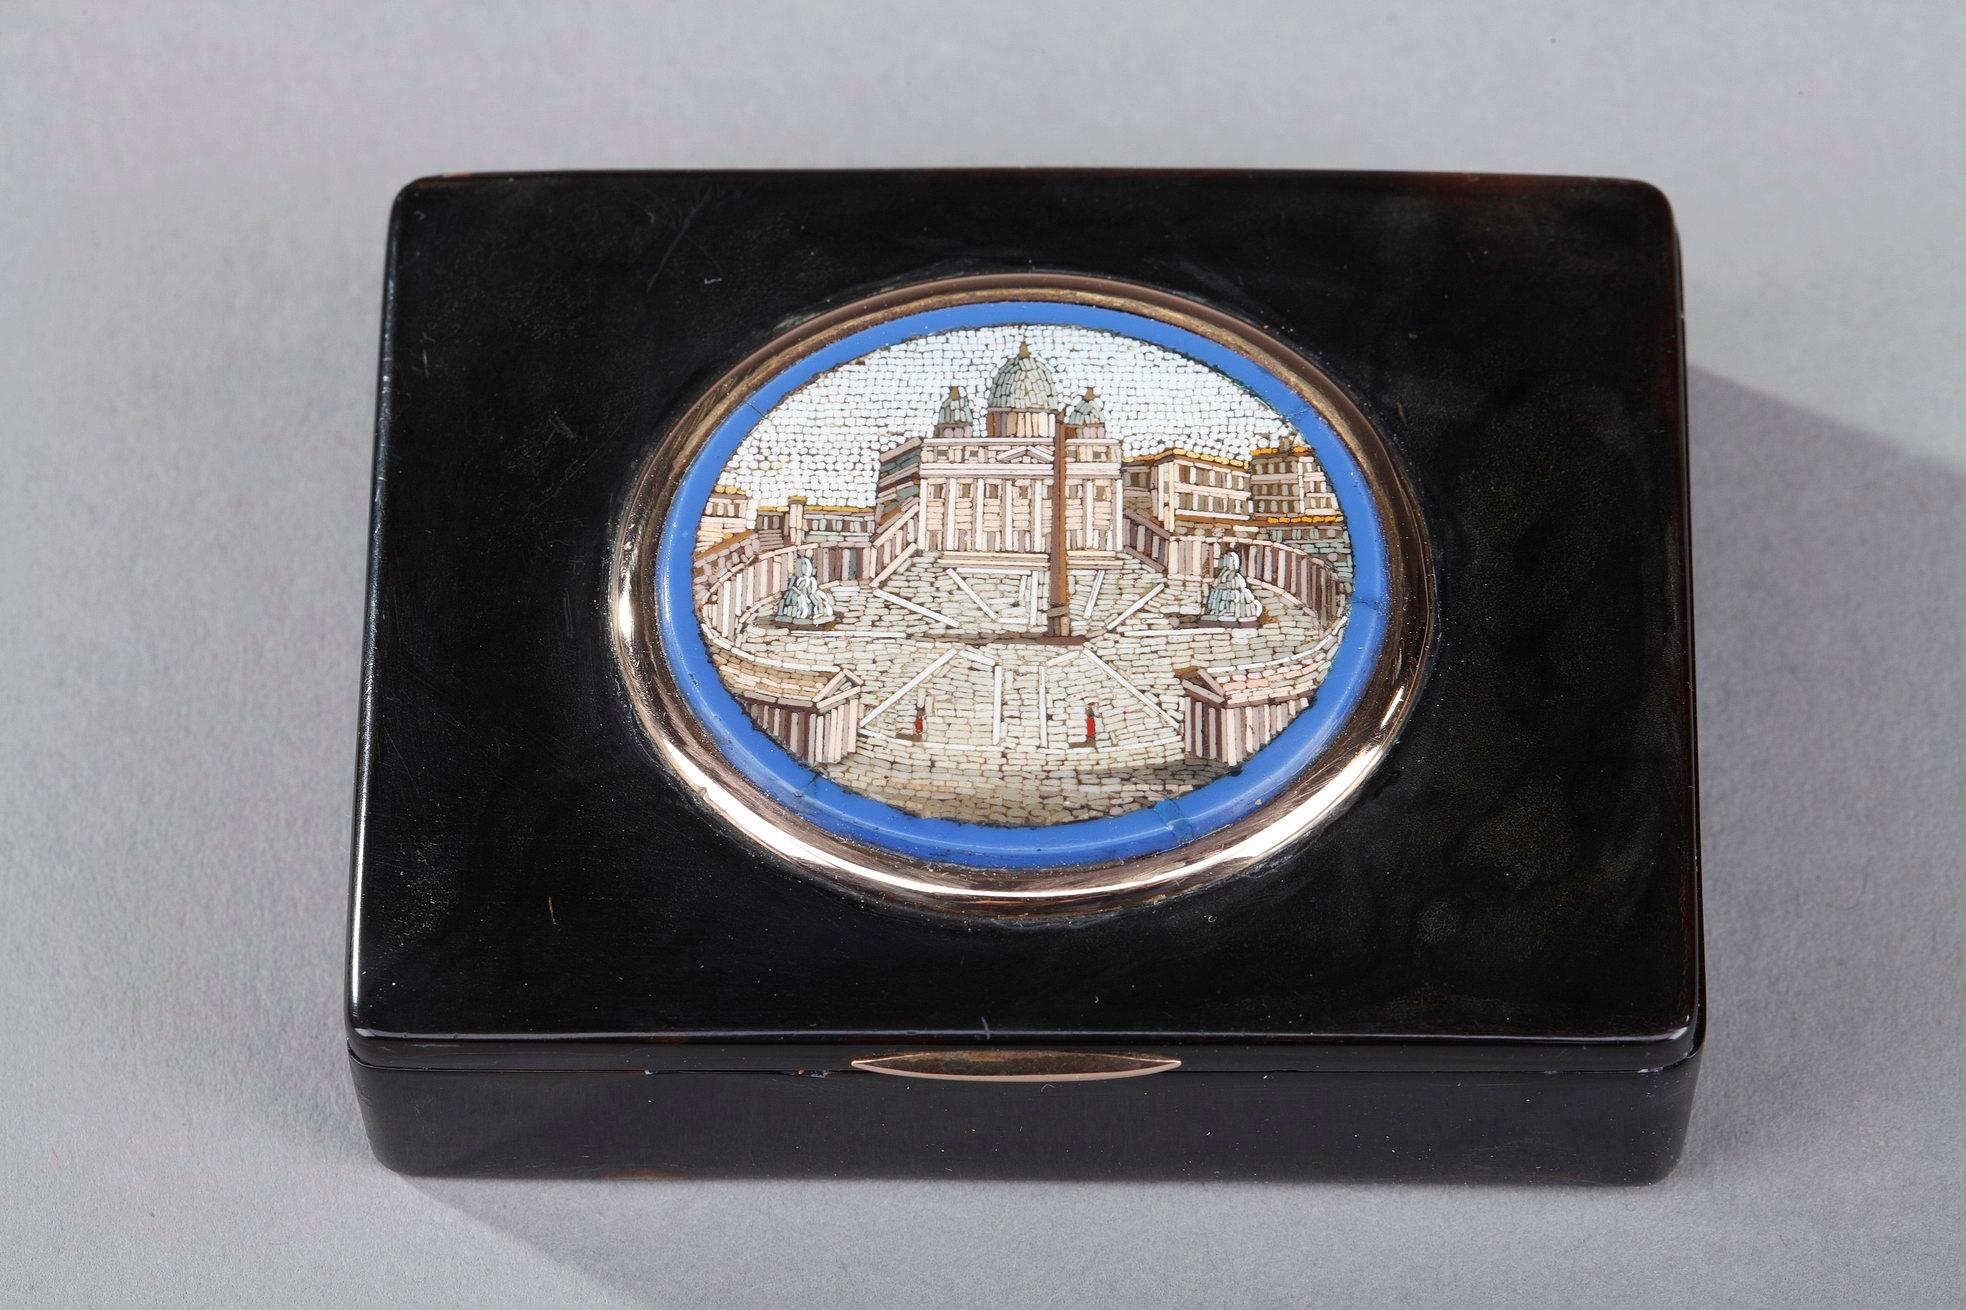 Small rectangular Restauration snuff box crafted in gold. The hinged lid is decorated with an oval micromosaic representing St. Peter's Square in Rome. Micromosaic is set in a gold setting.

Gold marks: Large guarantee mark Sardanapale head in an